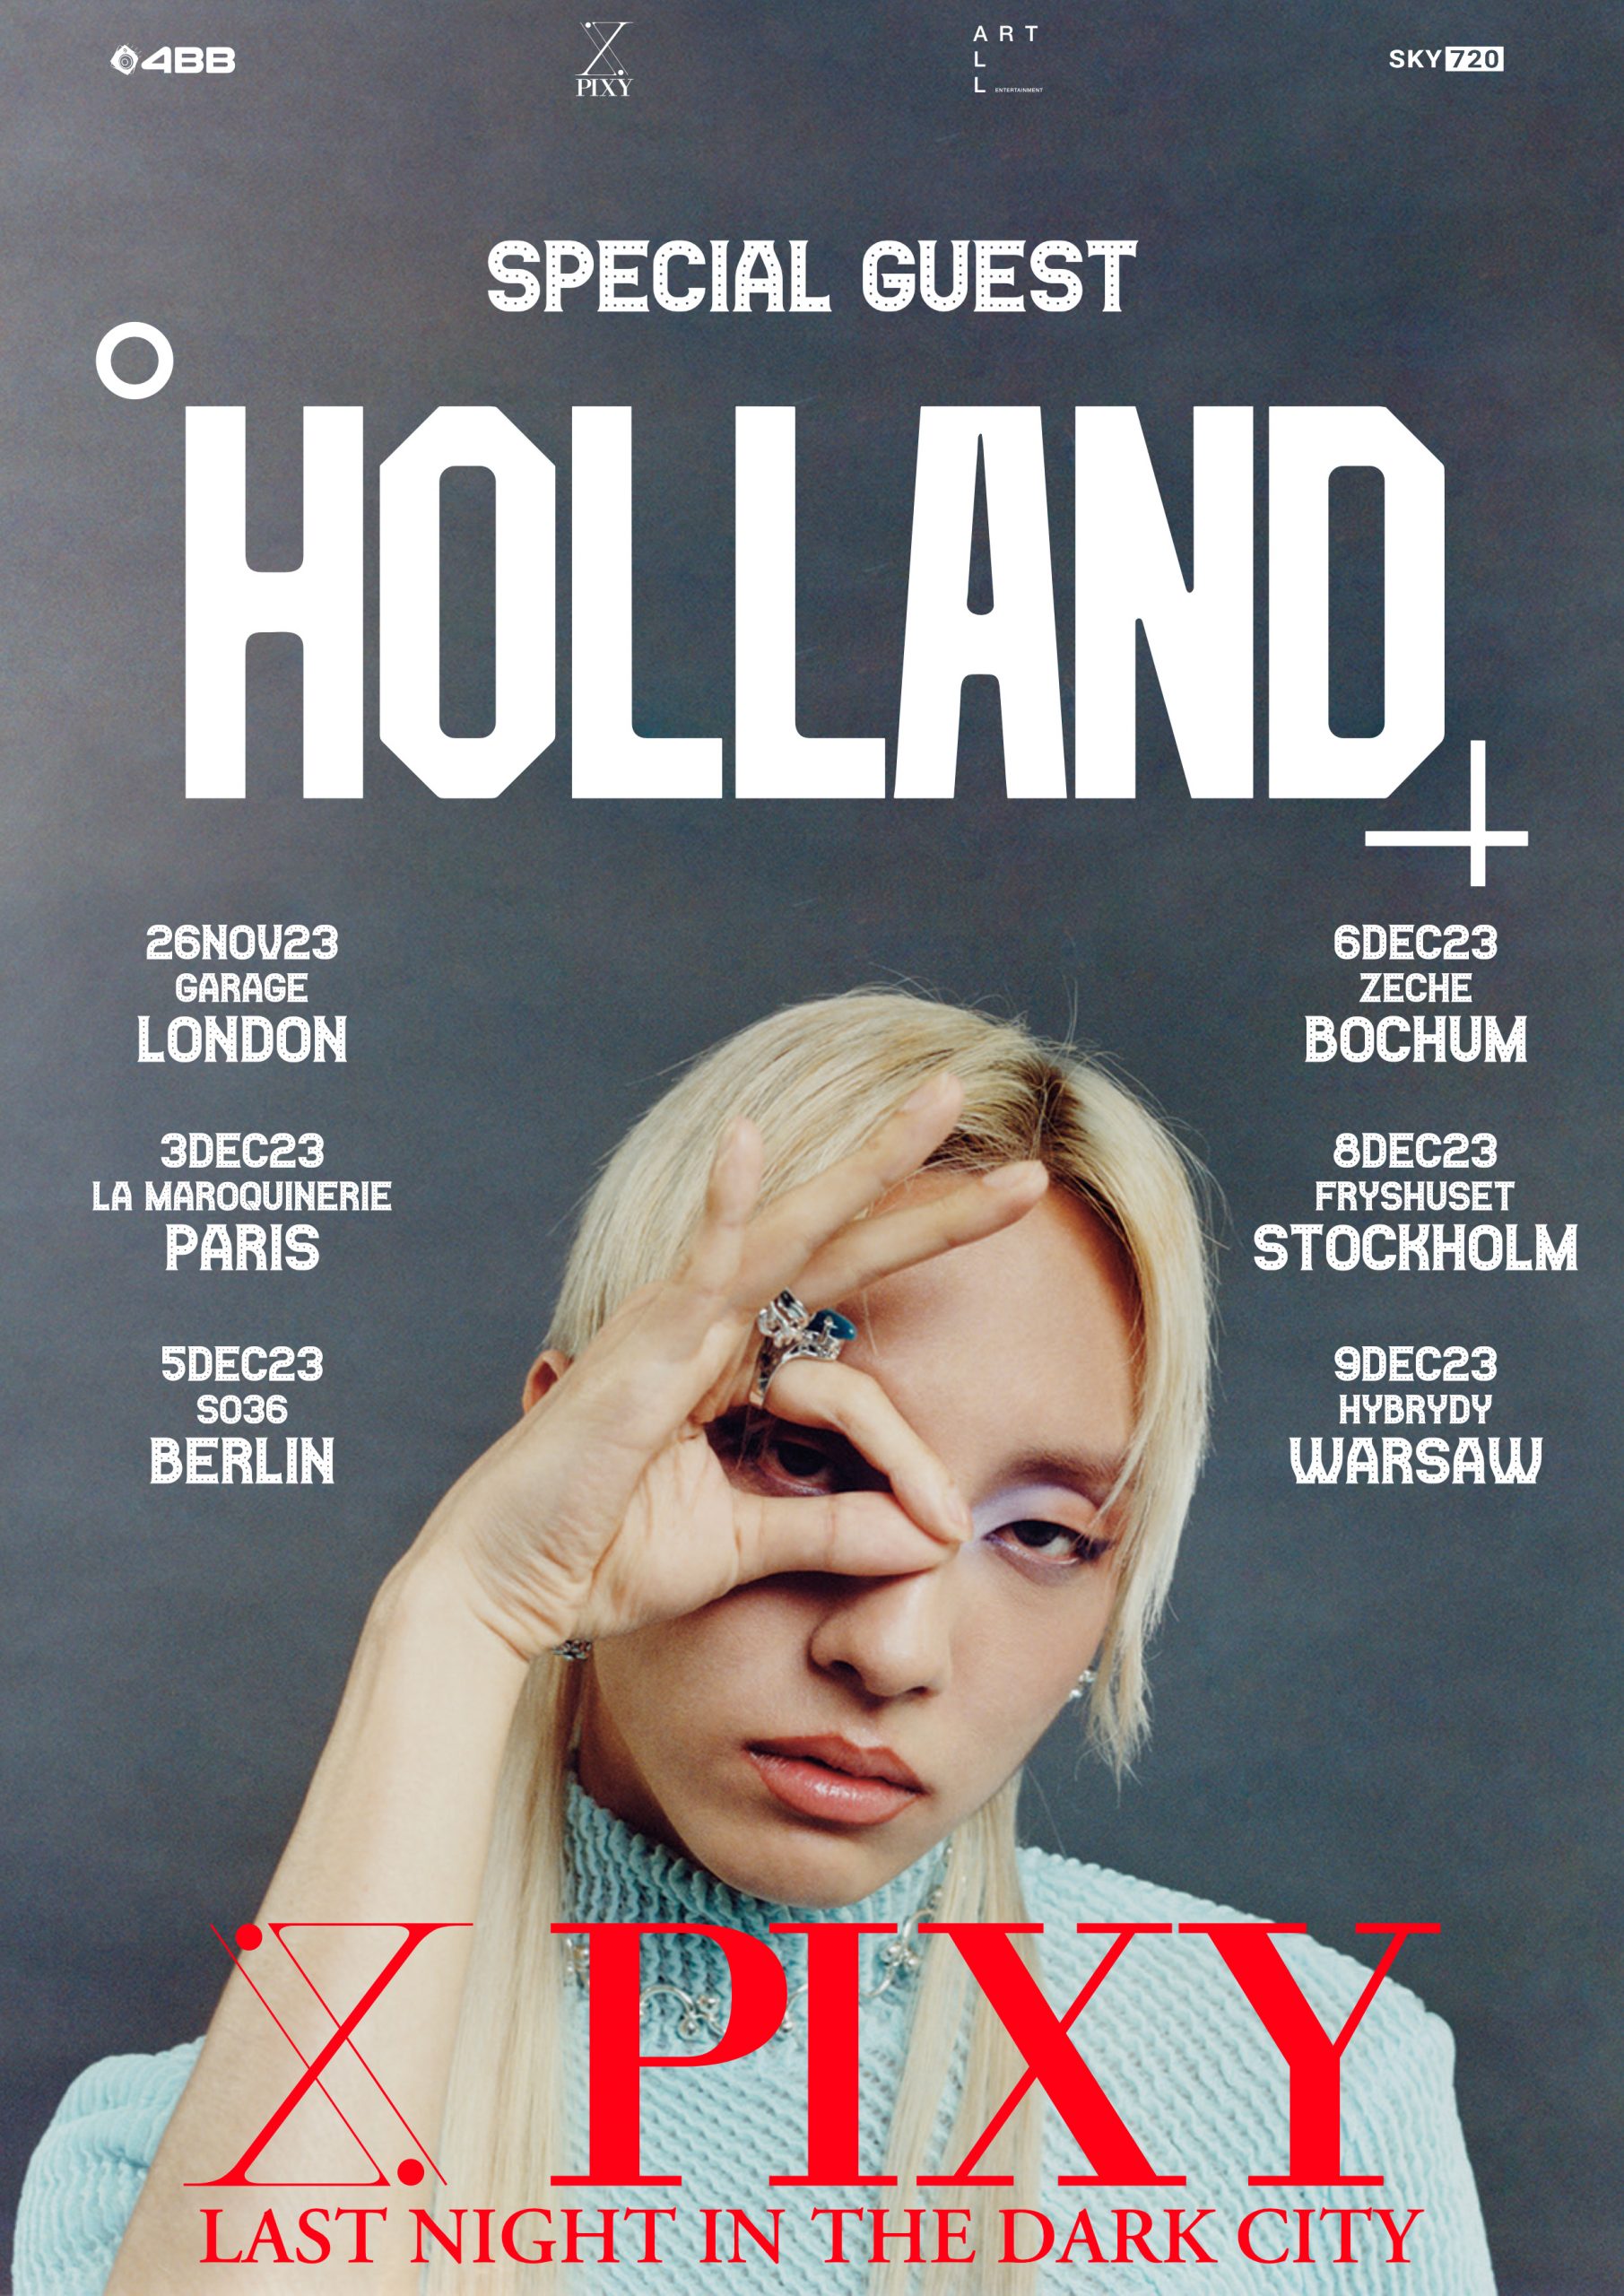 HOLLAND – PIXY TOUR SPECIAL GUEST